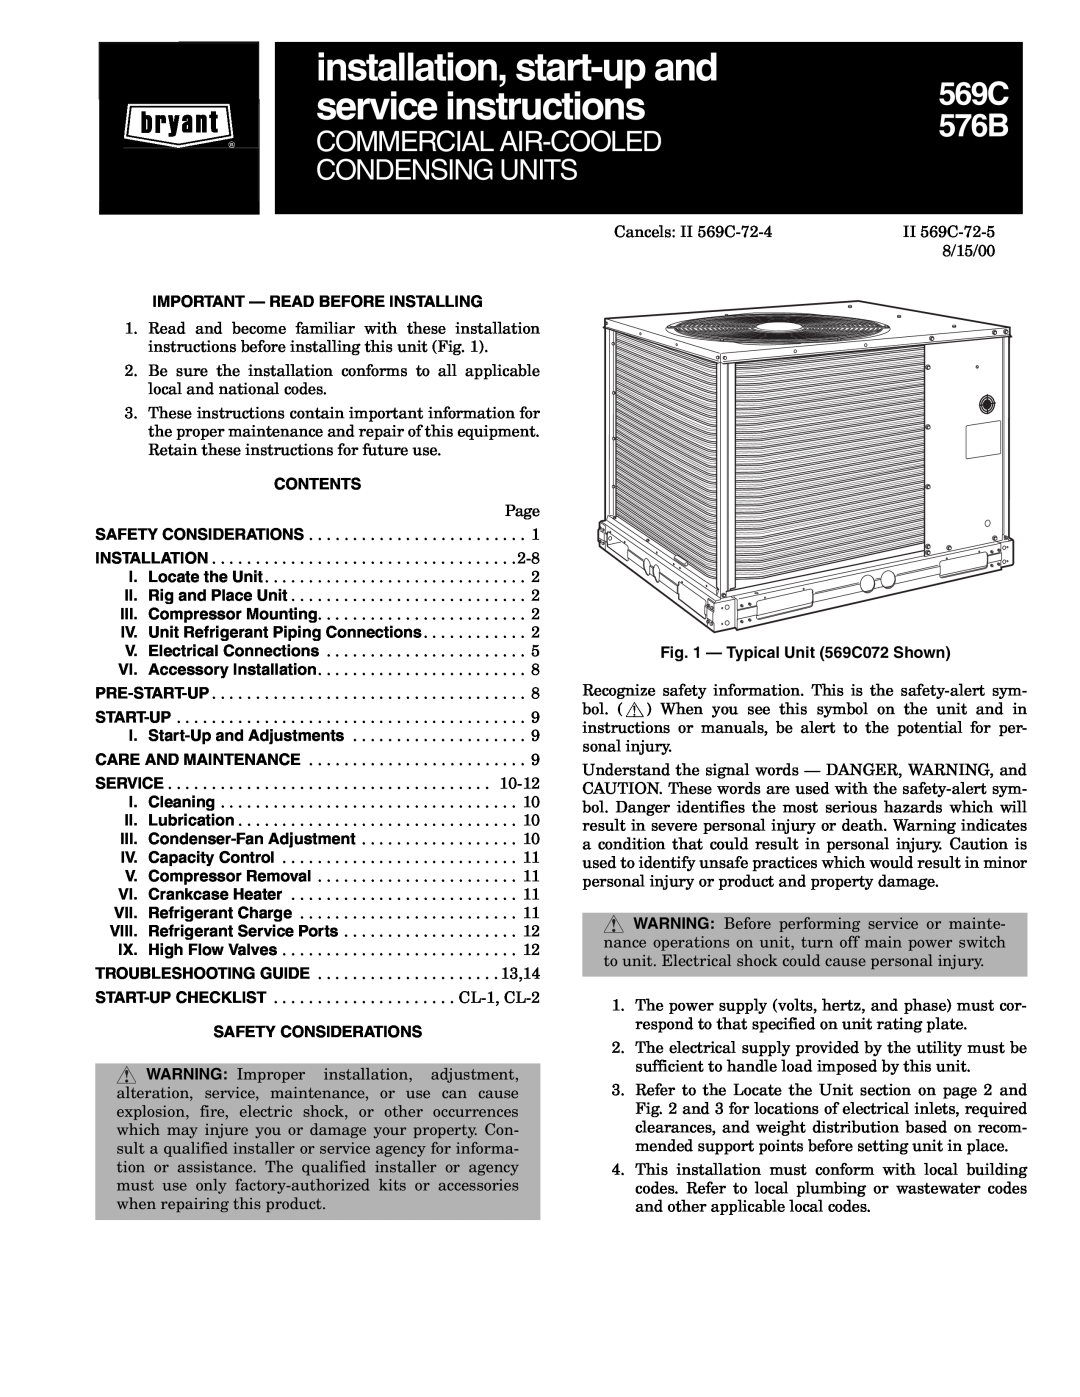 Bryant 576b installation instructions Important - Read Before Installing, Contents, Typical Unit 569C072 Shown, 576B 